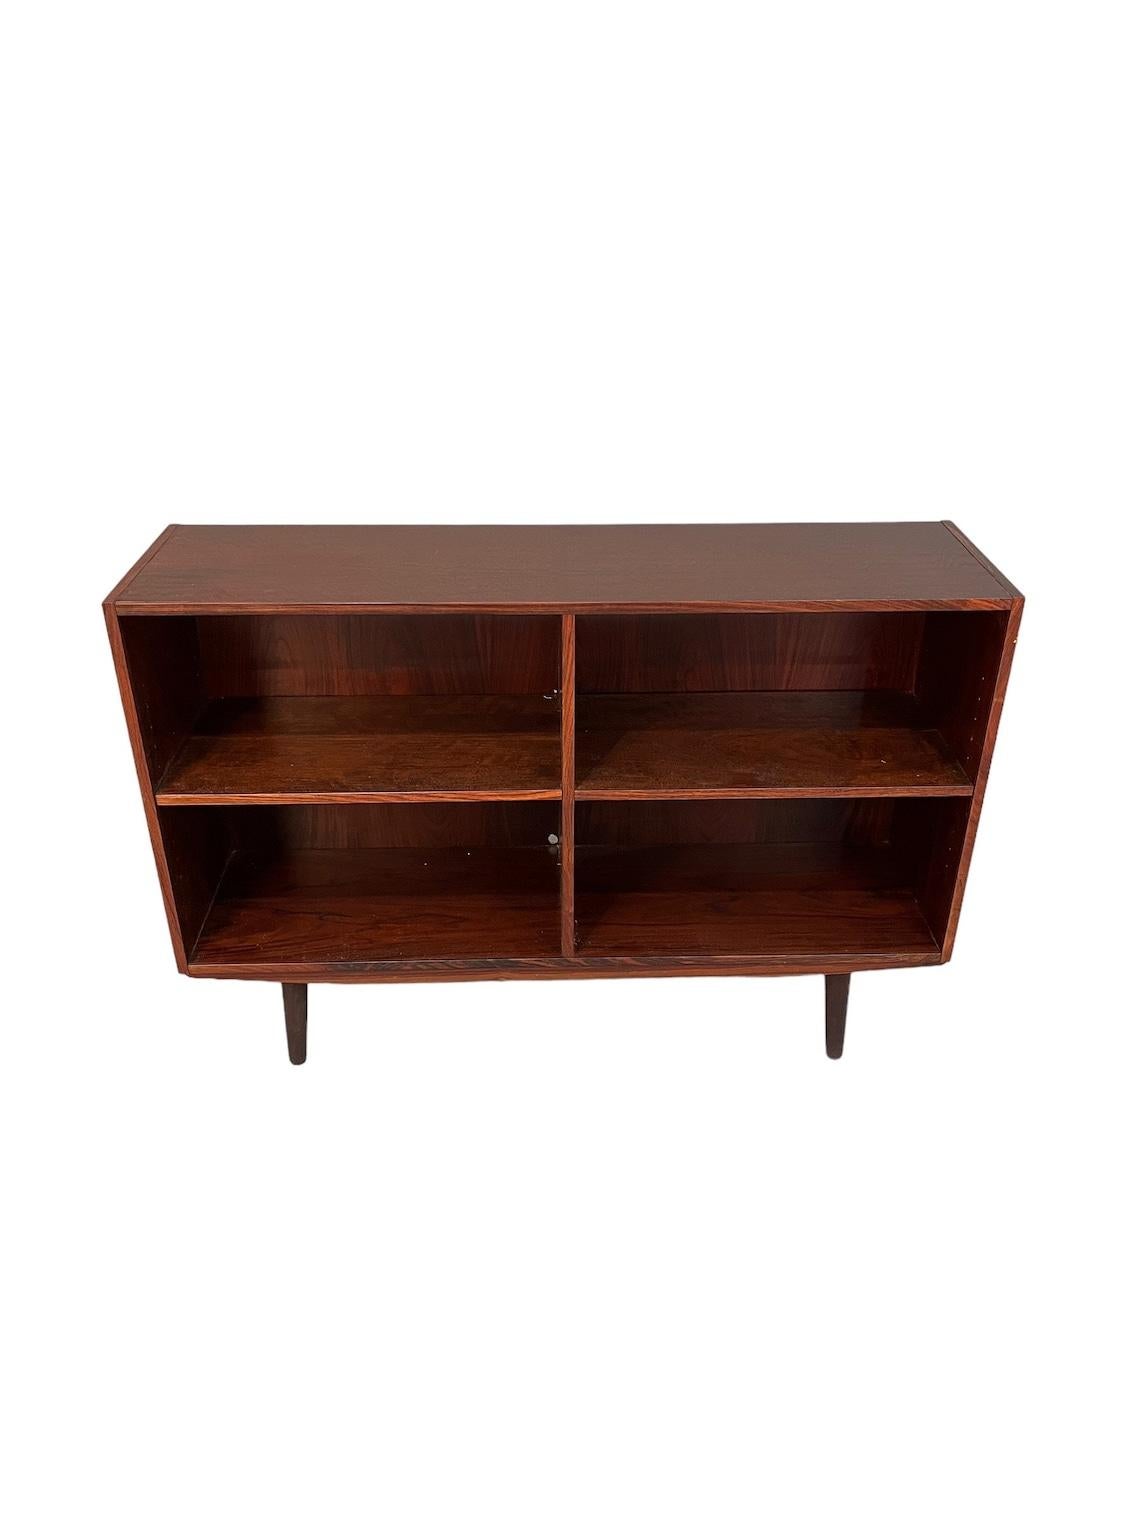 Mid-Century rosewood low bookcase from 1960's era with 4 storage shelvings and wood legs 
dimensions: W47 x D11.5 x H33 inches 
good condition for age and use